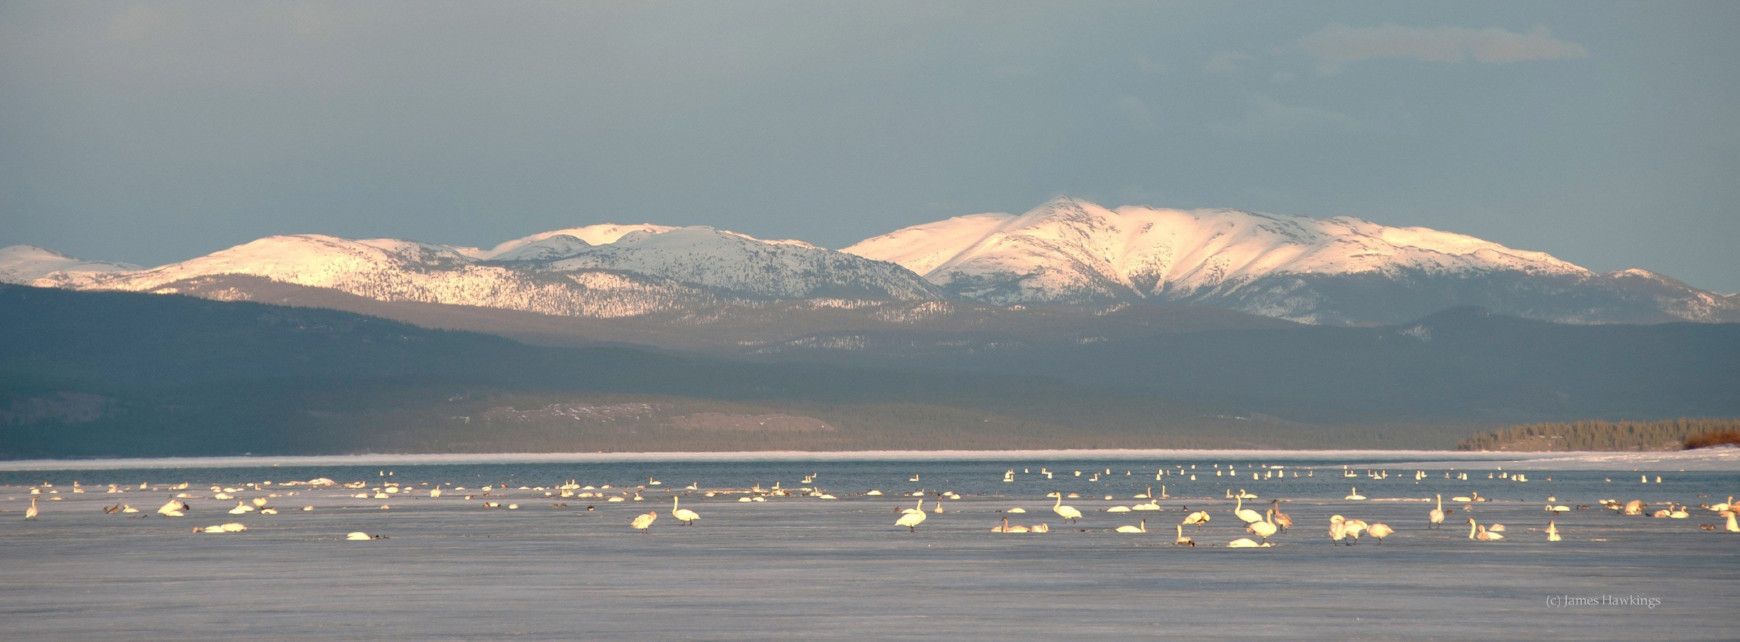 The Yukon is an important area for migrating birds, including tens of thousands of swans. Learn more about the Pacific Coast Population here.